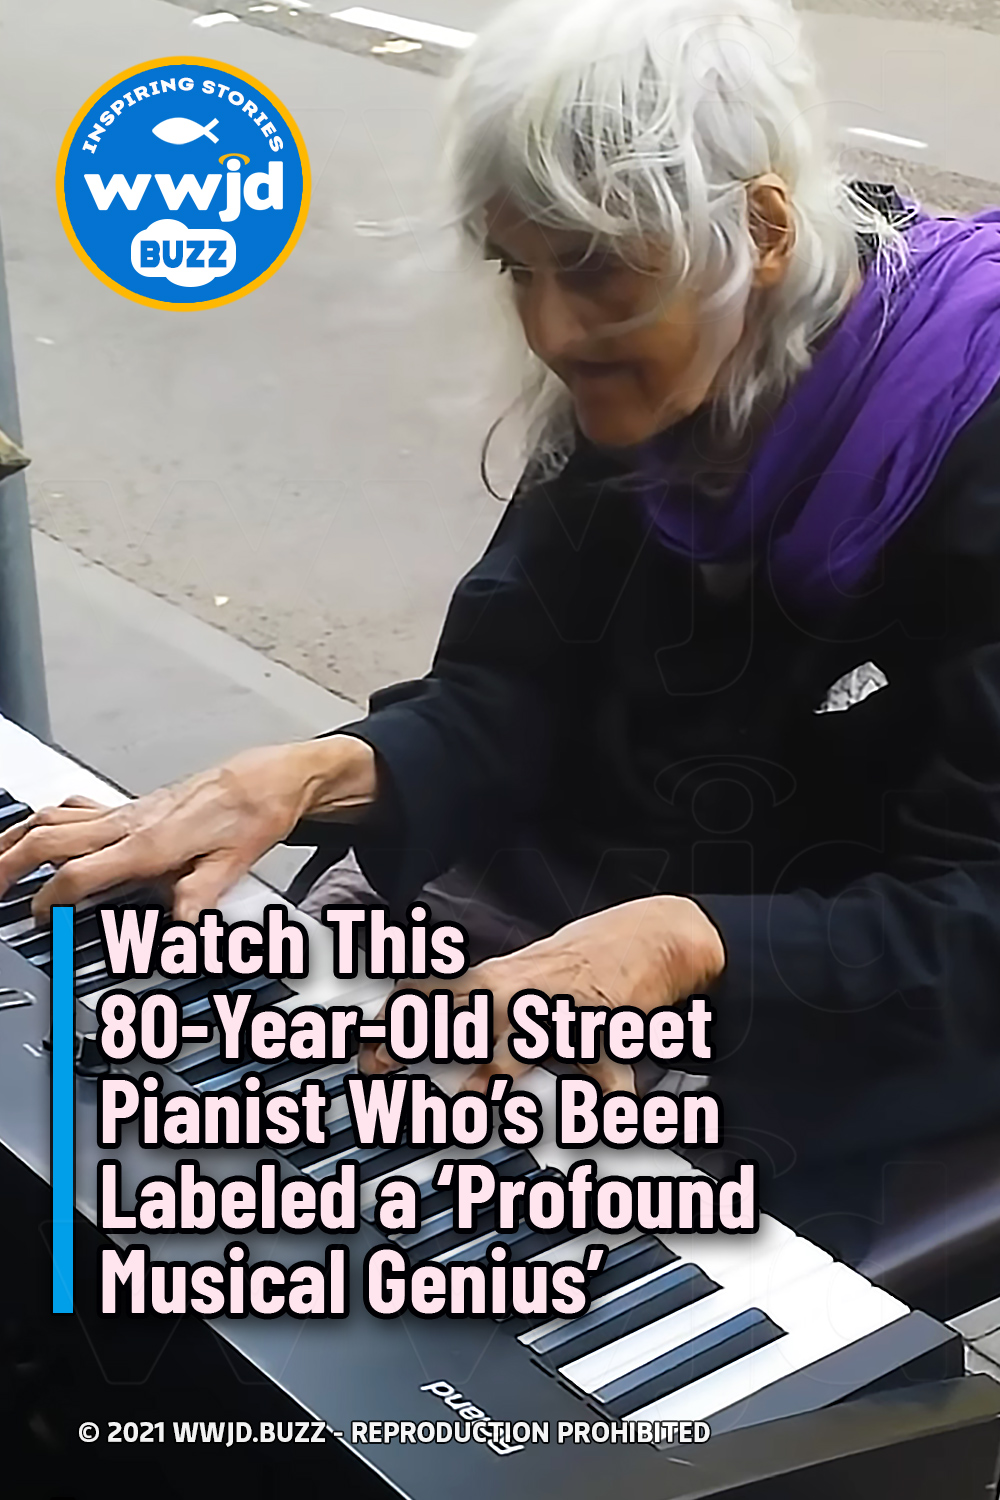 Watch This 80-Year-Old Street Pianist Who’s Been Labeled a ‘Profound Musical Genius’